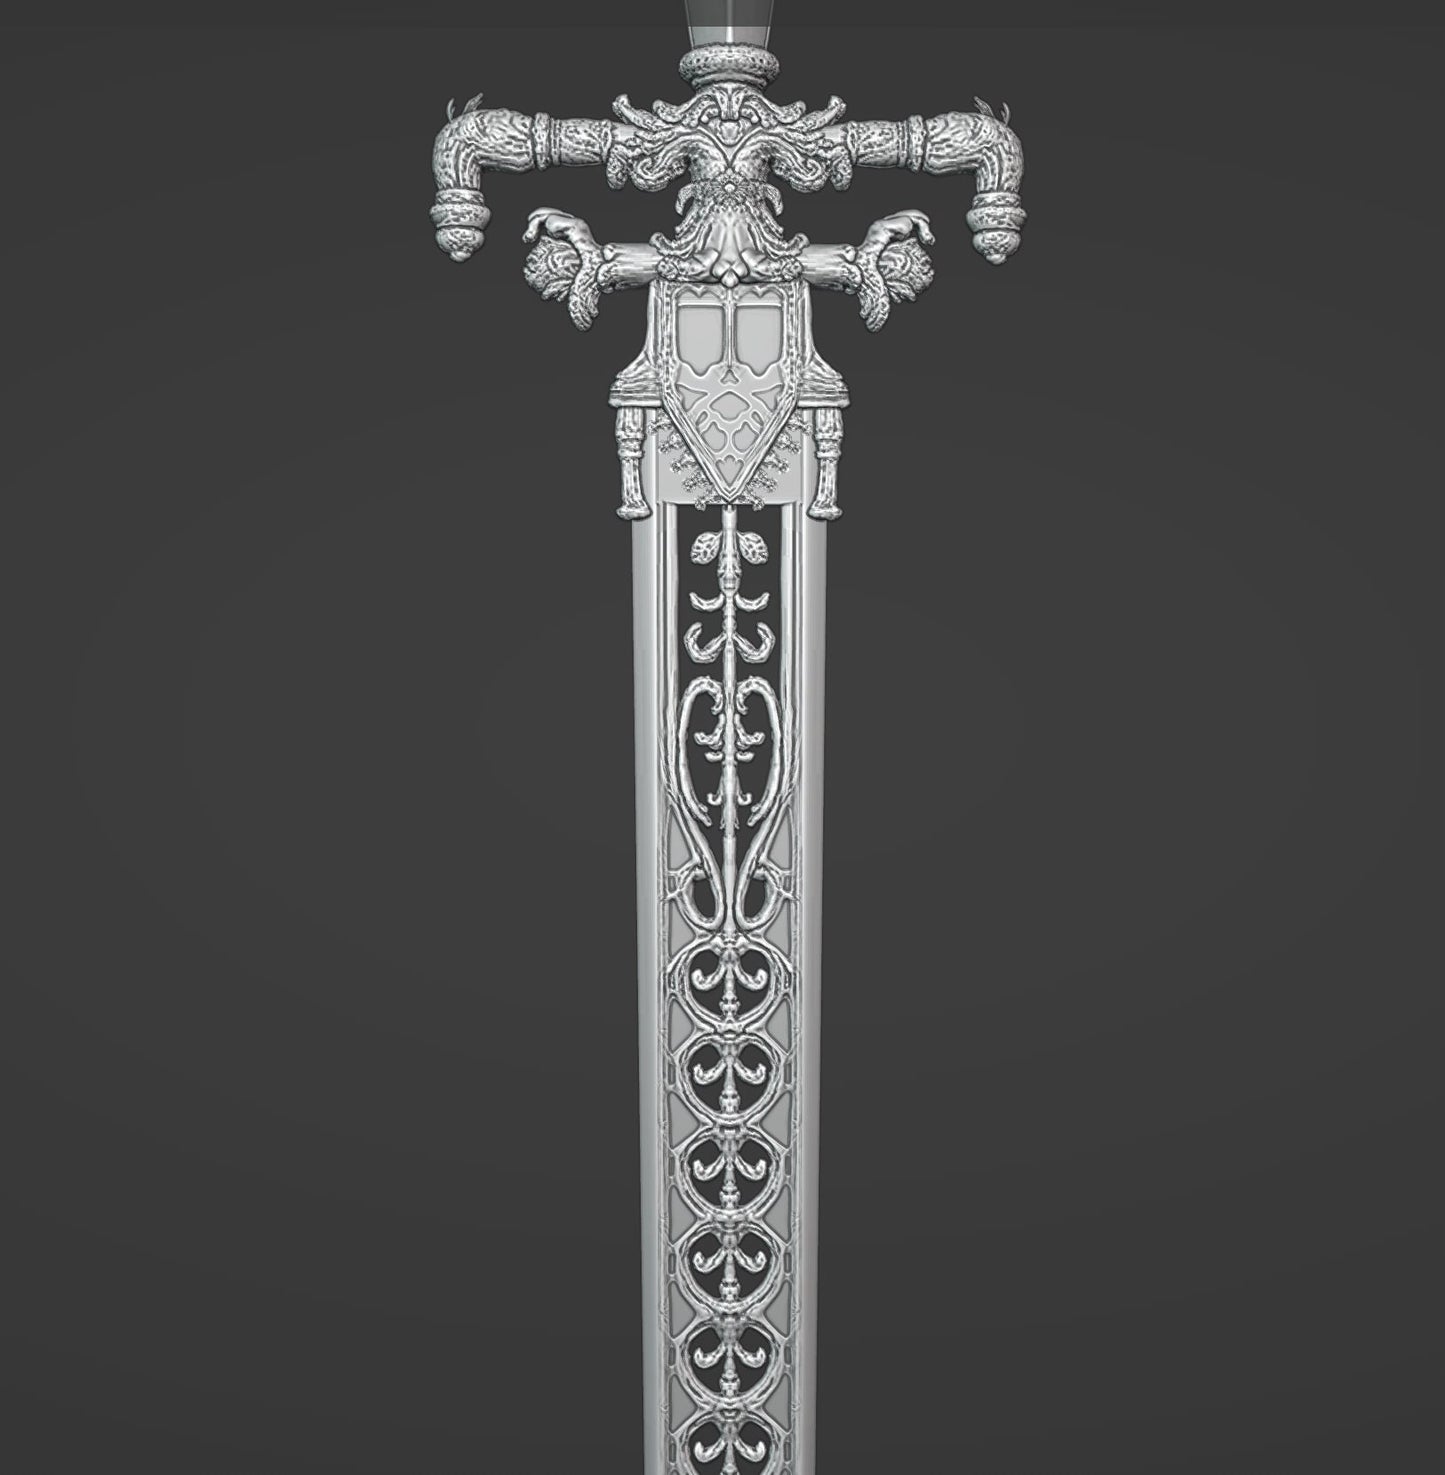 Sword of Night and Flame - Digital 3D Model Files and Physical 3D Printed Kit Options - Straight Sword